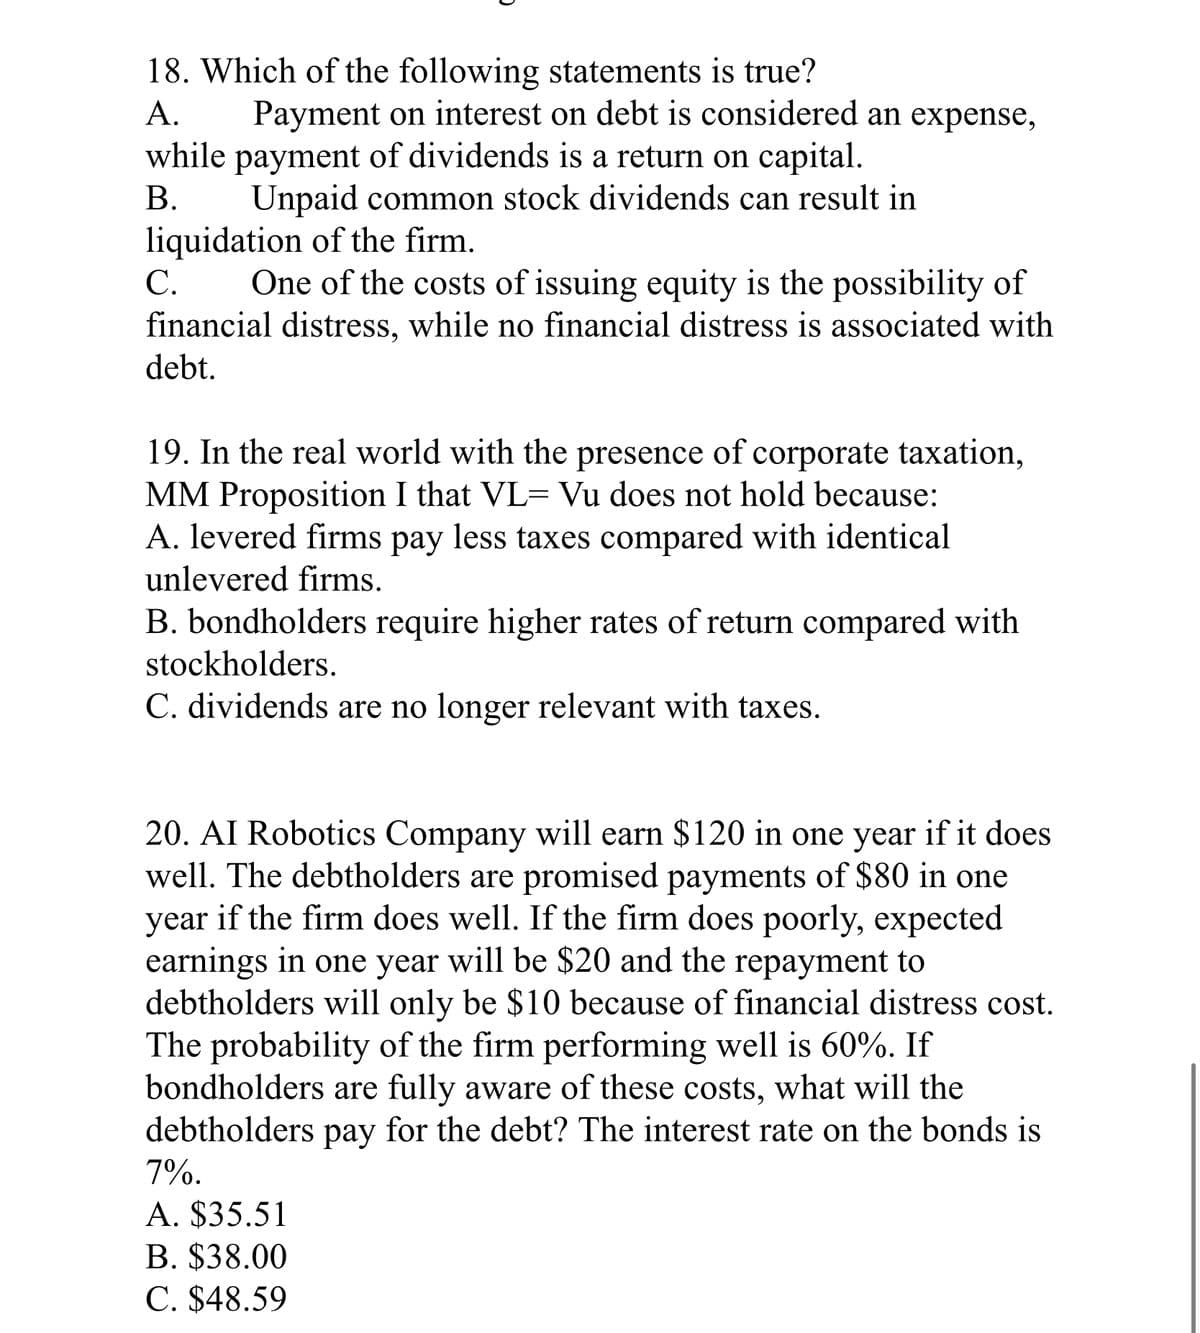 18. Which of the following statements is true?
A.
Payment on interest on debt is considered an expense,
while payment of dividends is a return on capital.
B.
Unpaid common stock dividends can result in
liquidation of the firm.
C.
One of the costs of issuing equity is the possibility of
financial distress, while no financial distress is associated with
debt.
19. In the real world with the presence of corporate taxation,
MM Proposition I that VL- Vu does not hold because:
A. levered firms pay less taxes compared with identical
unlevered firms.
B. bondholders require higher rates of return compared with
stockholders.
C. dividends are no longer relevant with taxes.
20. AI Robotics Company will earn $120 in one year if it does
well. The debtholders are promised payments of $80 in one
year if the firm does well. If the firm does poorly, expected
earnings in one year will be $20 and the repayment to
debtholders will only be $10 because of financial distress cost.
The probability of the firm performing well is 60%. If
bondholders are fully aware of these costs, what will the
debtholders pay for the debt? The interest rate on the bonds is
7%.
A. $35.51
B. $38.00
C. $48.59